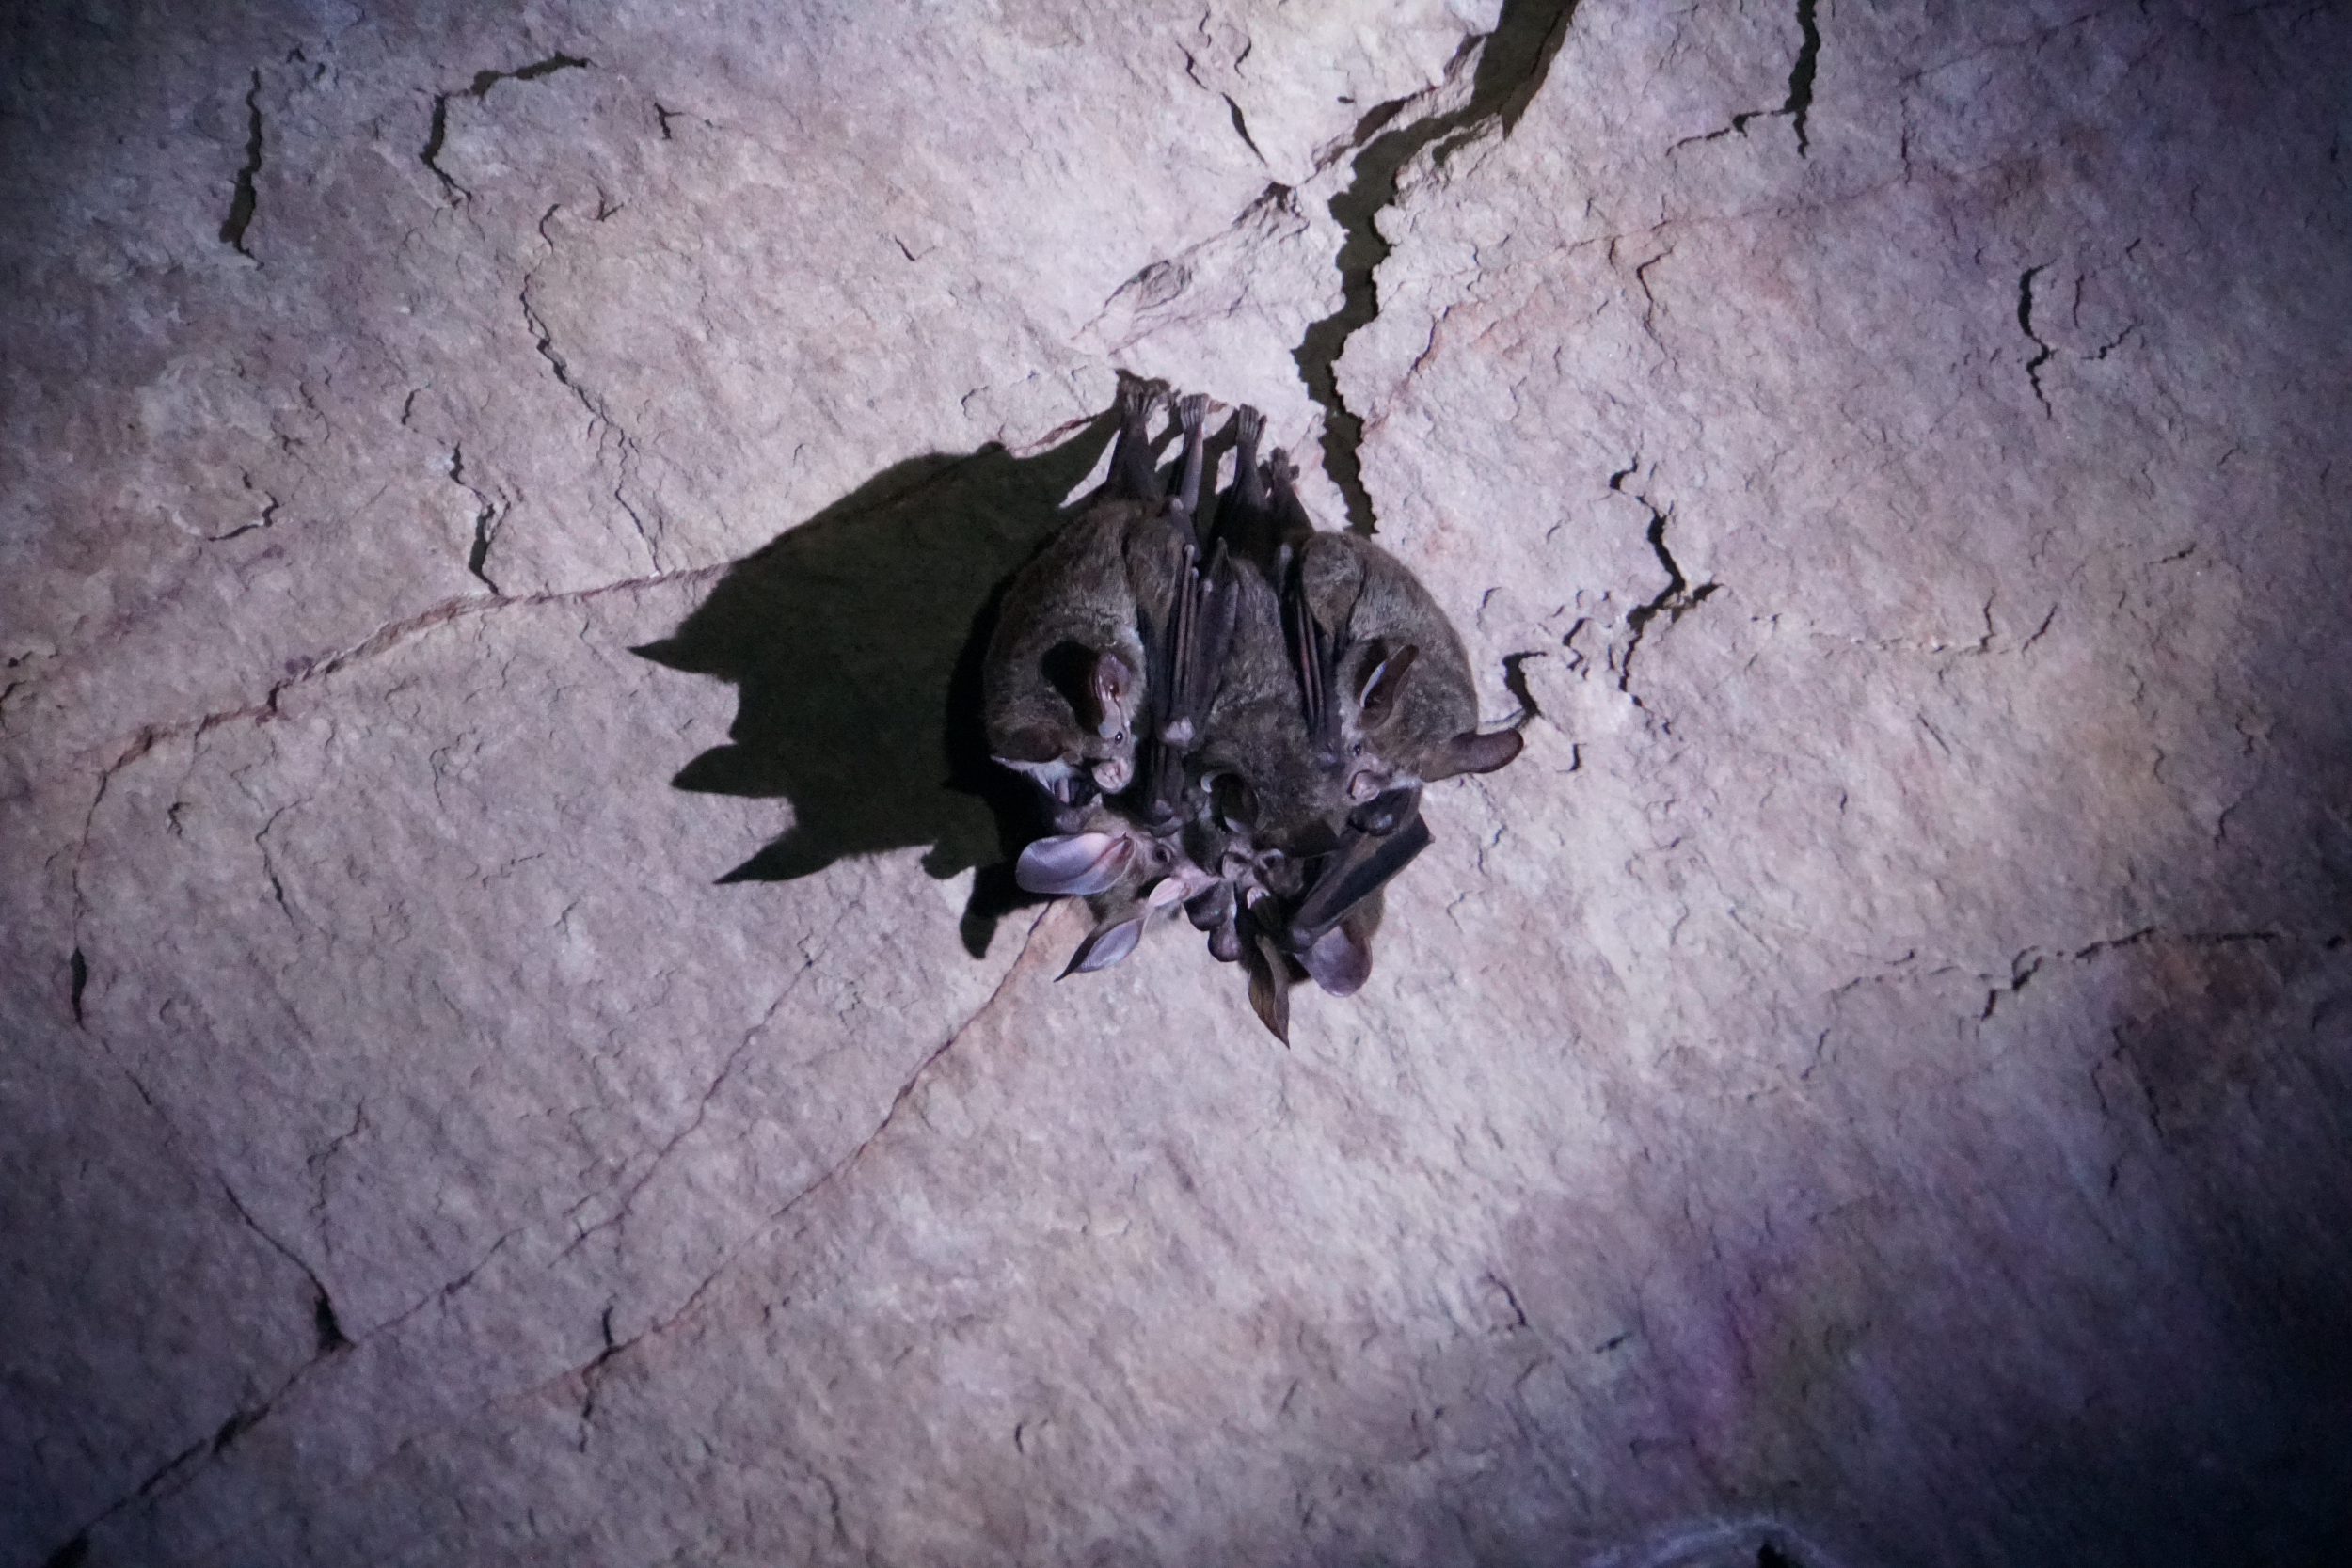 46. Bats in cave